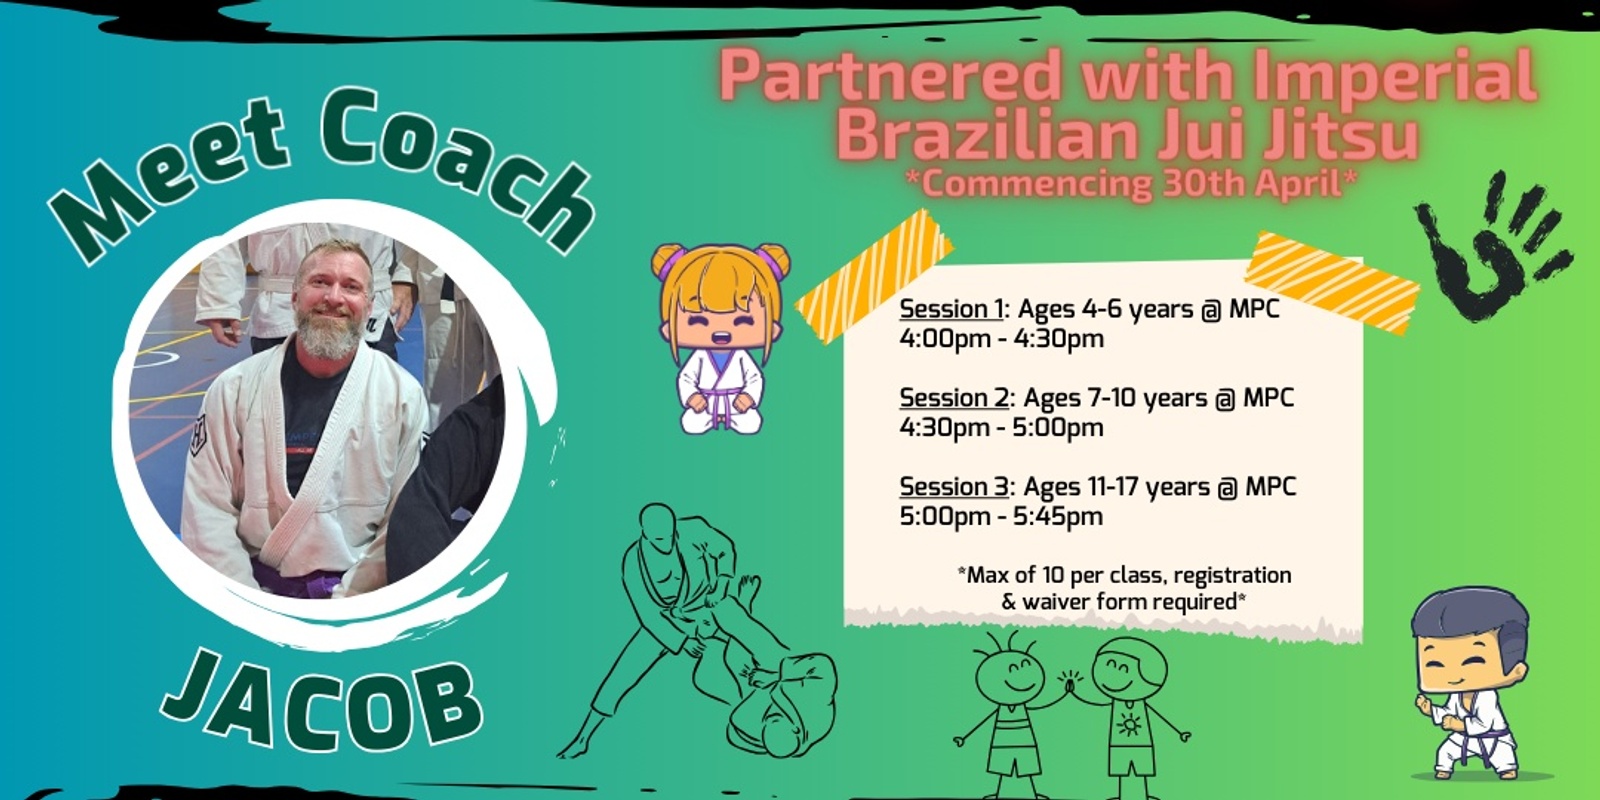 Banner image for (Ages 4-6) Self Defense & fitness with Swans Onslow and Imperial Brazilian Jui Jitsu